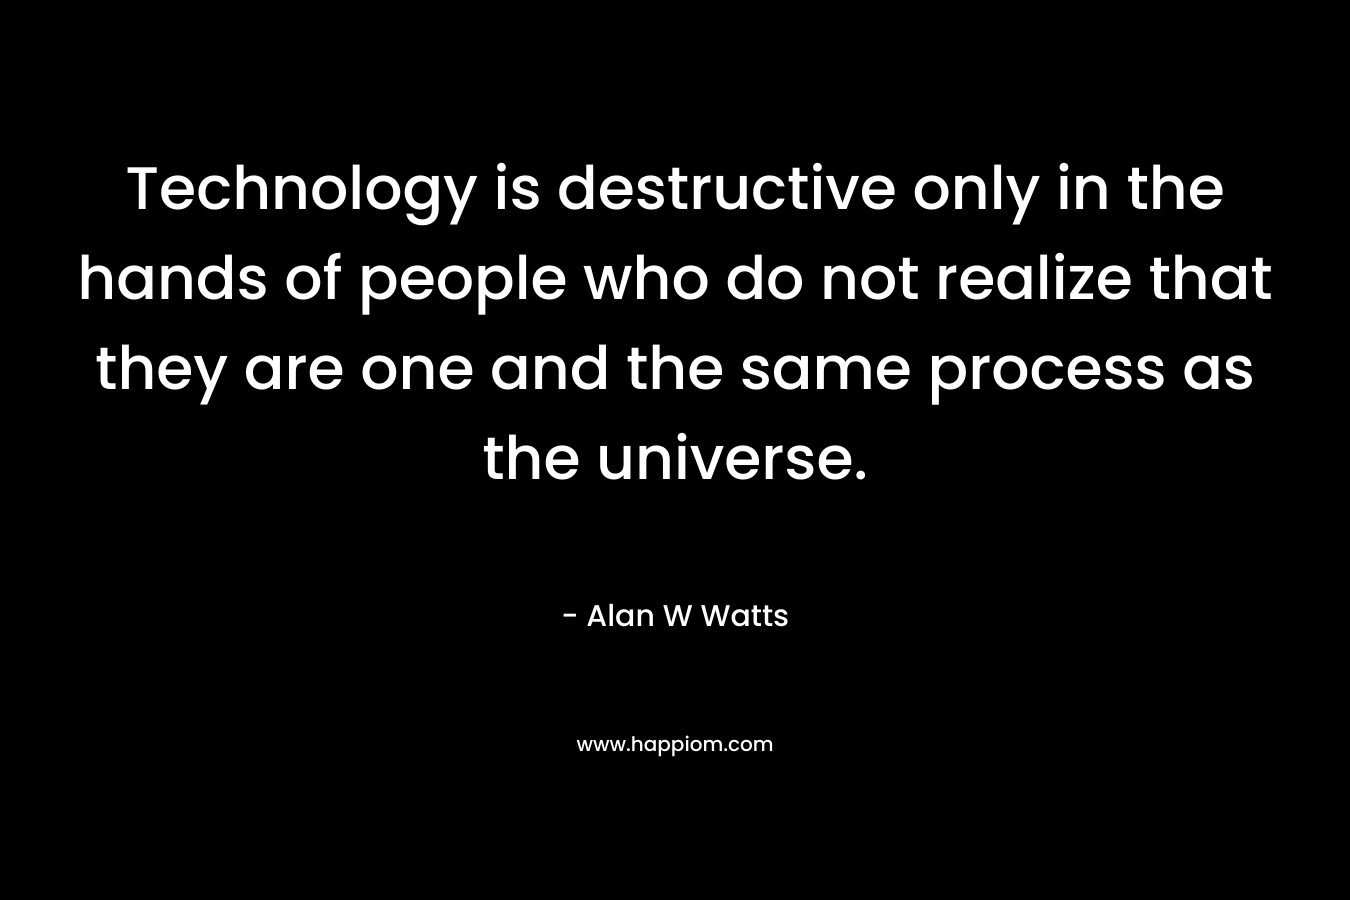 Technology is destructive only in the hands of people who do not realize that they are one and the same process as the universe. 